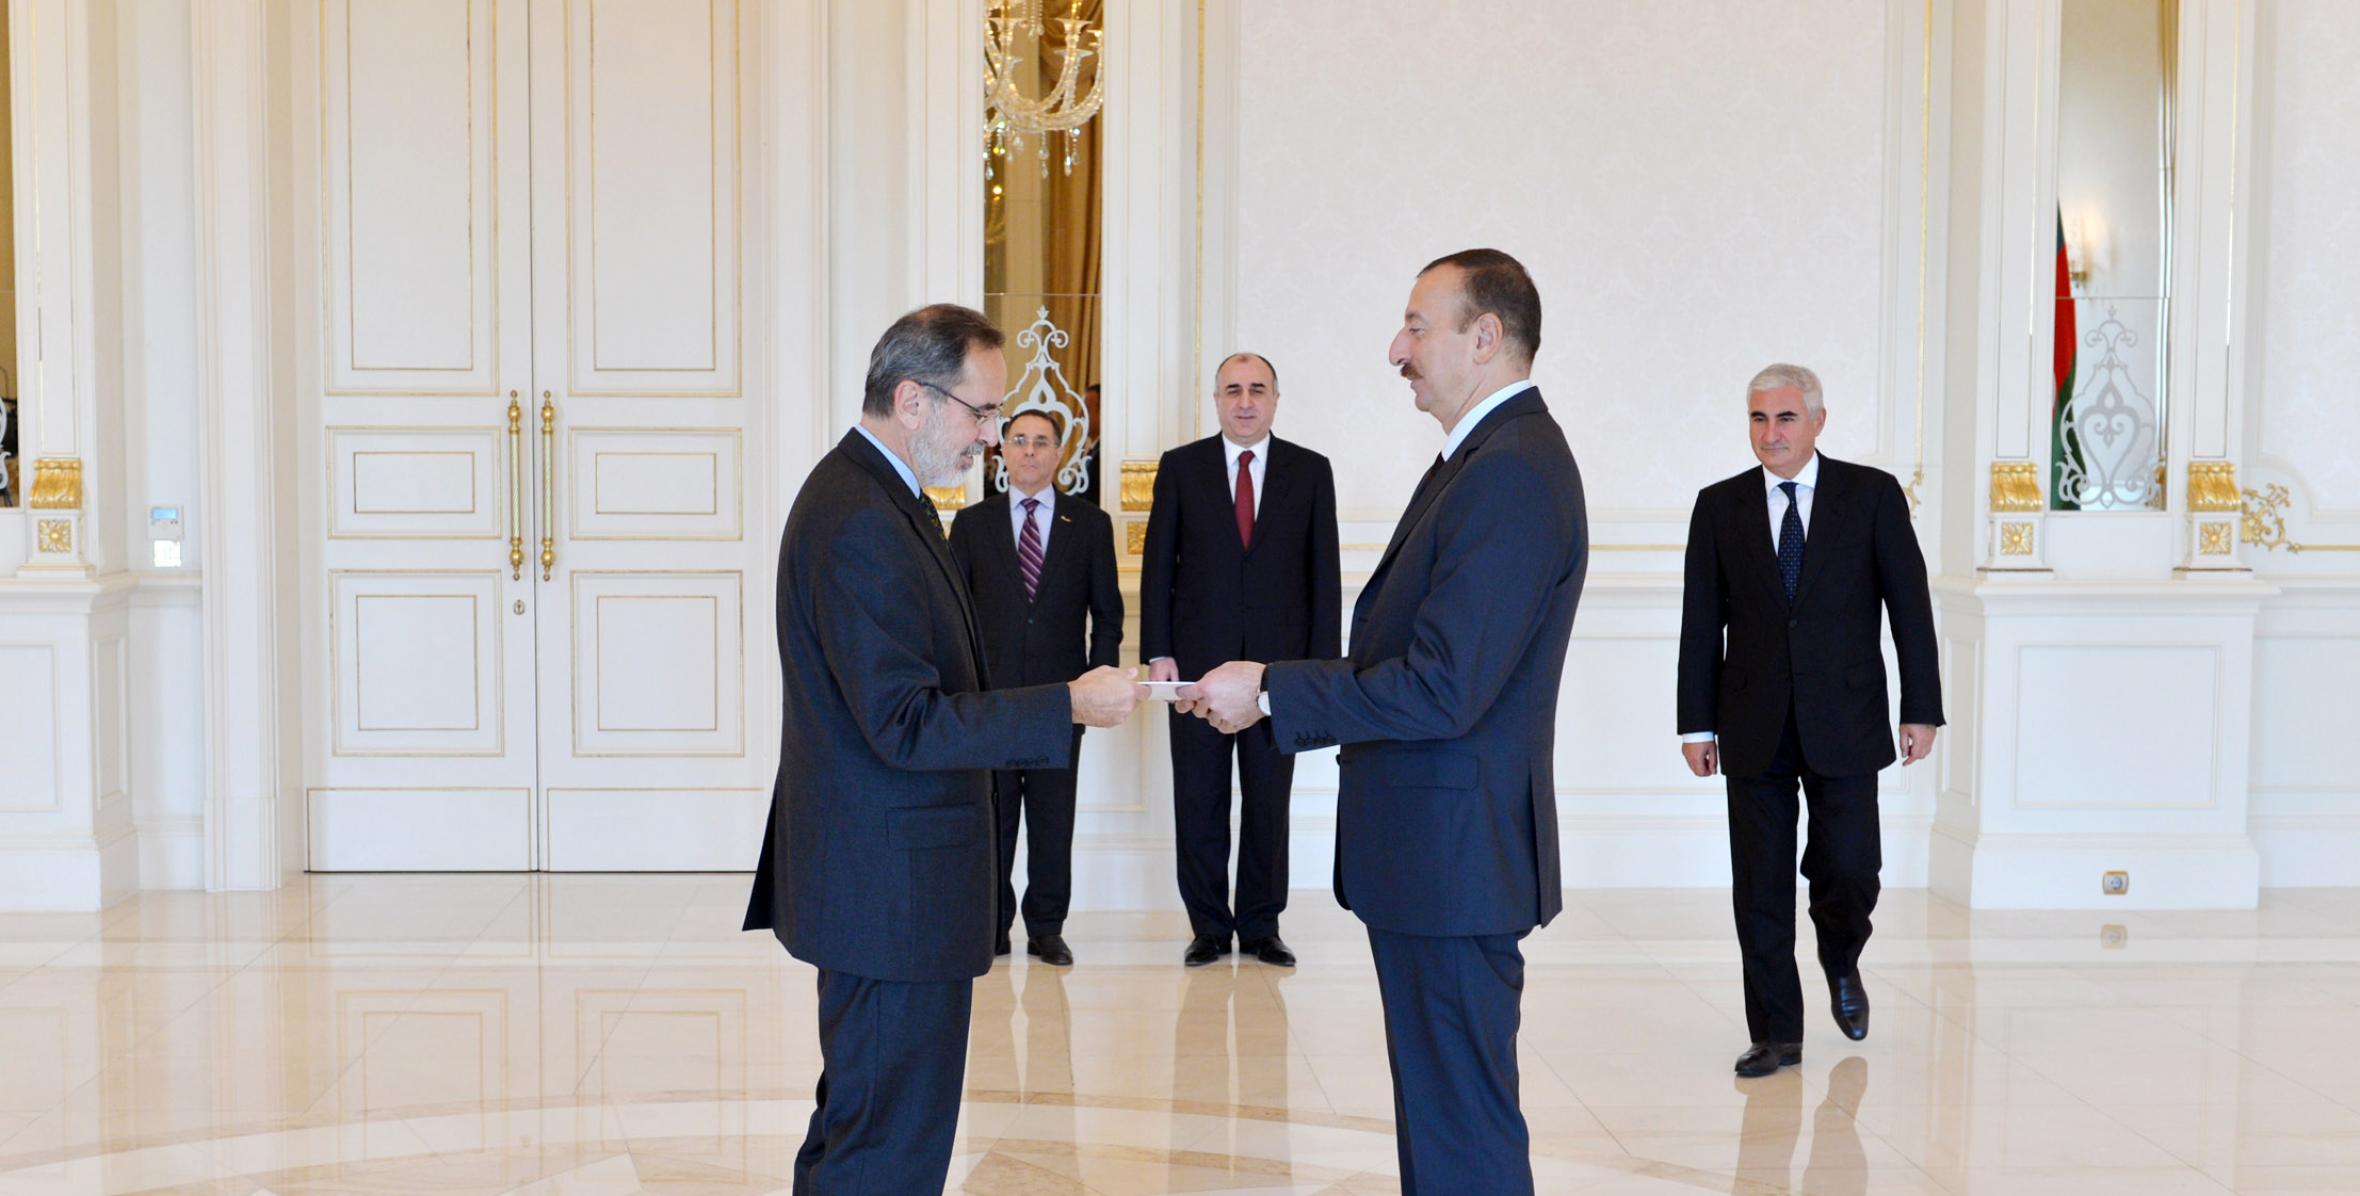 Ilham Aliyev accepted the credentials of the Ambassador of Brazil to Azerbaijan